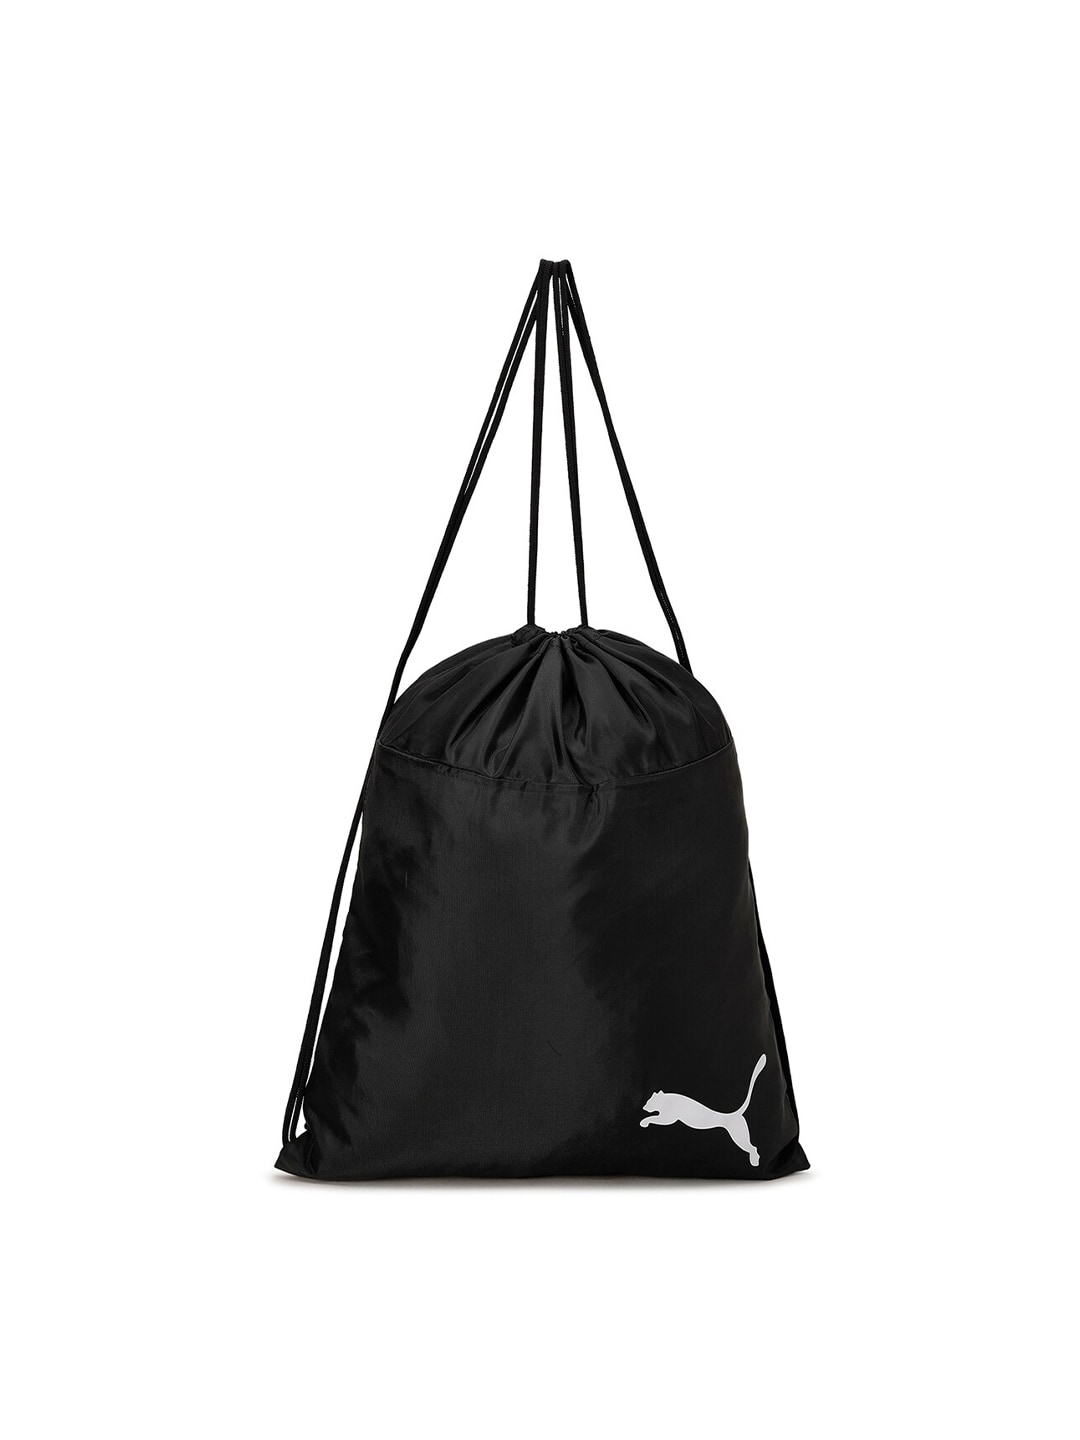 Puma Unisex Black Solid teamGOAL Gym Sack Graphic Backpack Price in India